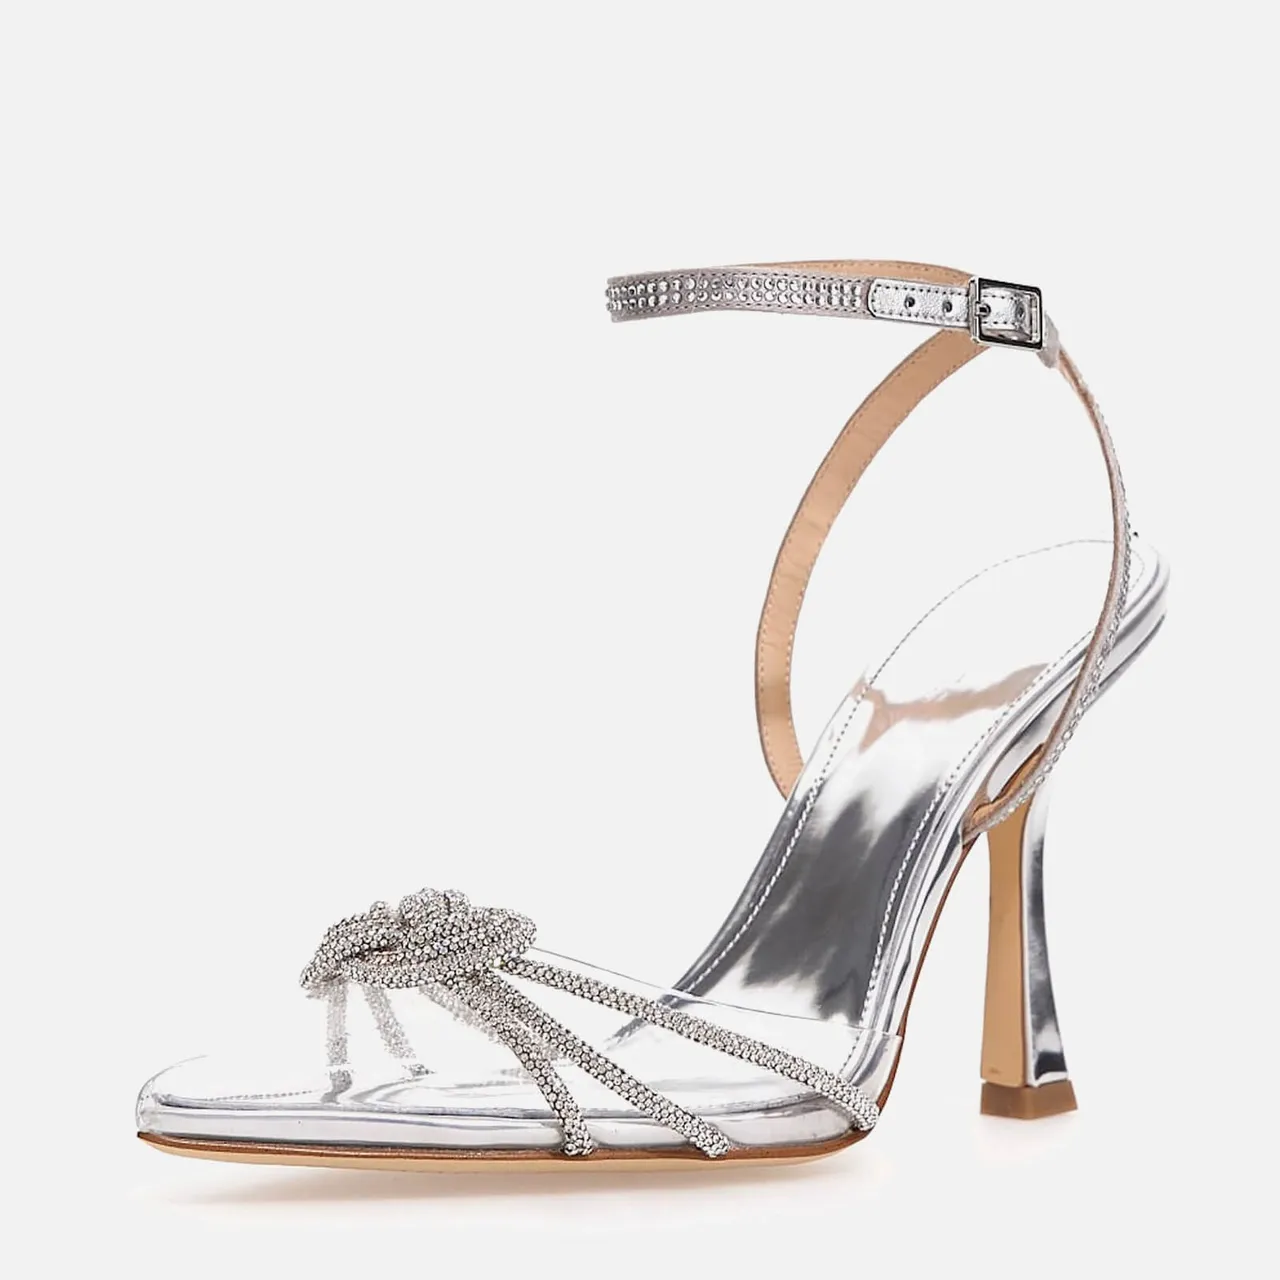 Guess Women's Syena Crystal-Embellished Heeled Sandals